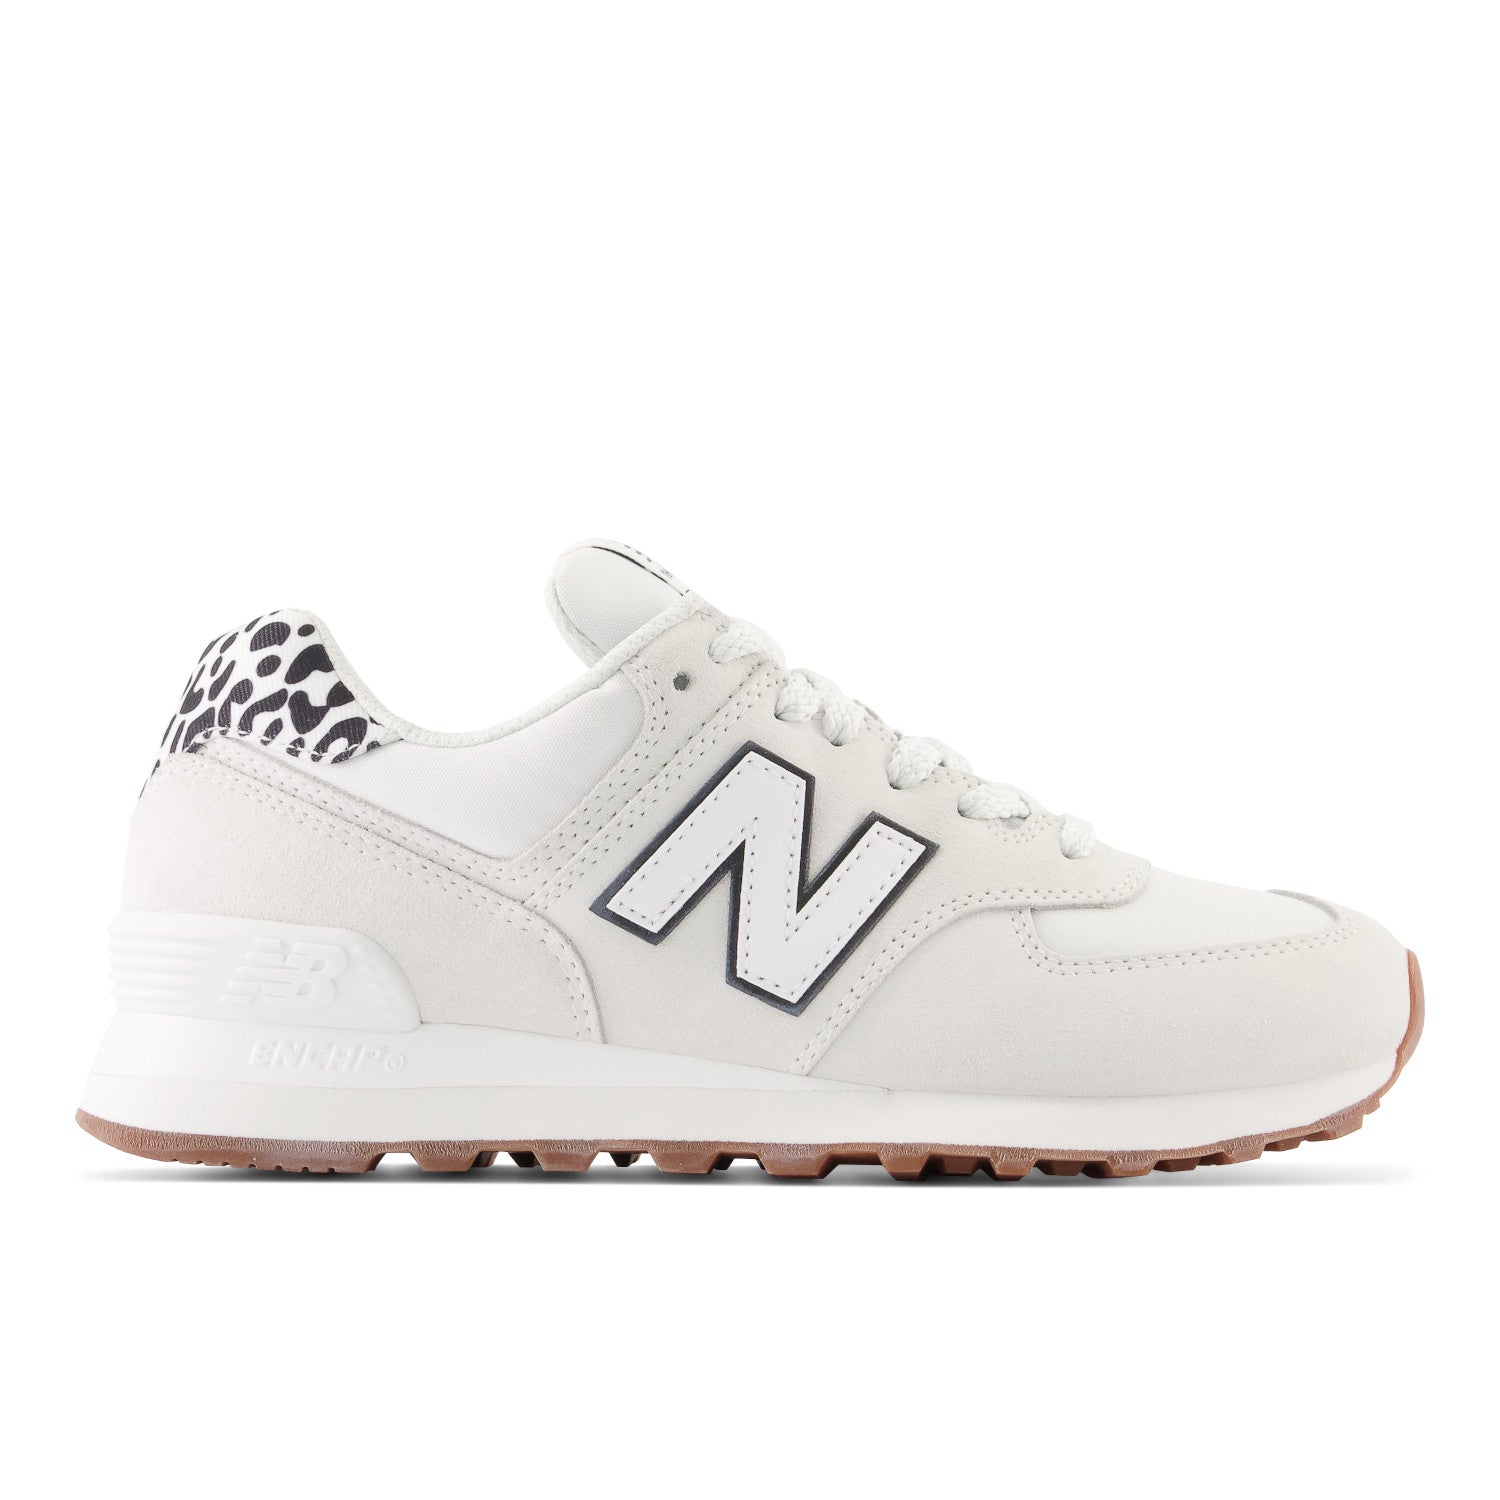 Women's New Balance 574 Color: Reflection